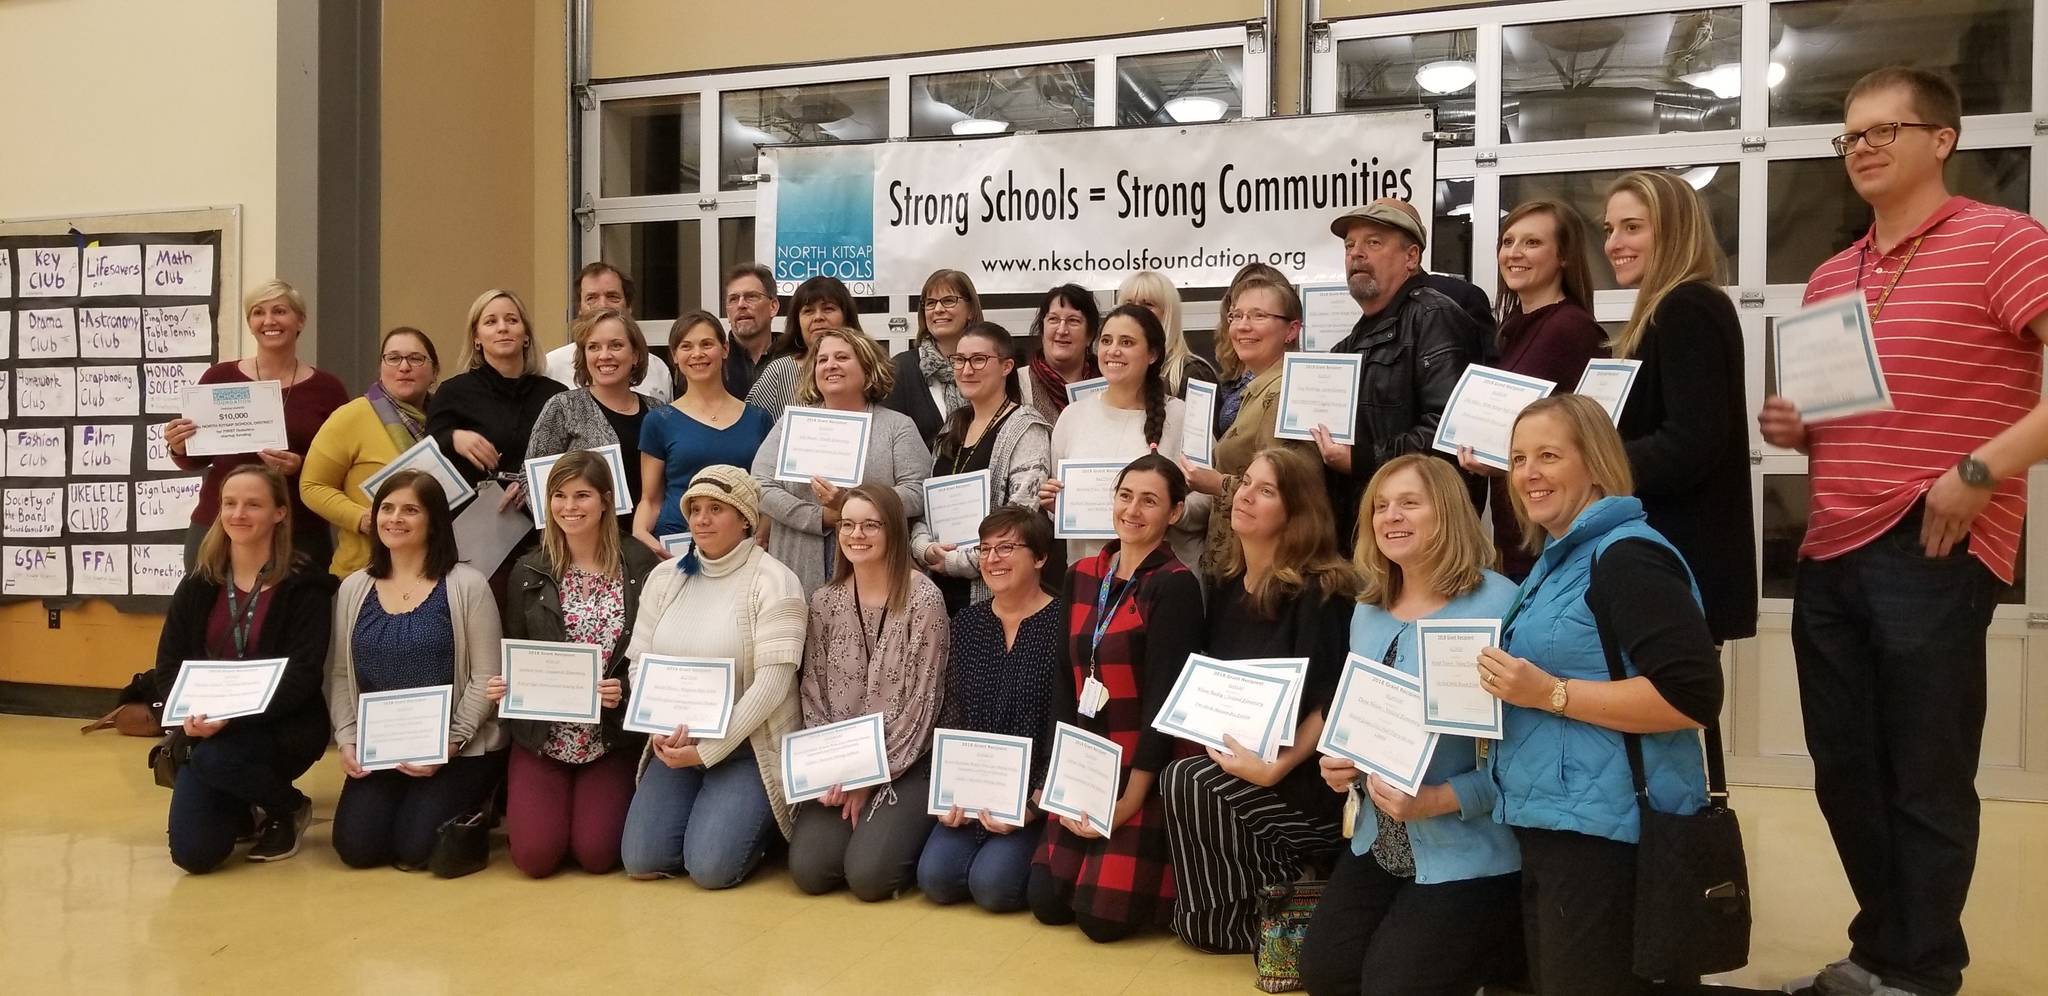 34 Grants totaling more than $76,000 were awarded to North Kitsap School District teachers and staff during the North Kitsap Schools Foundation’s Celebration of Education.